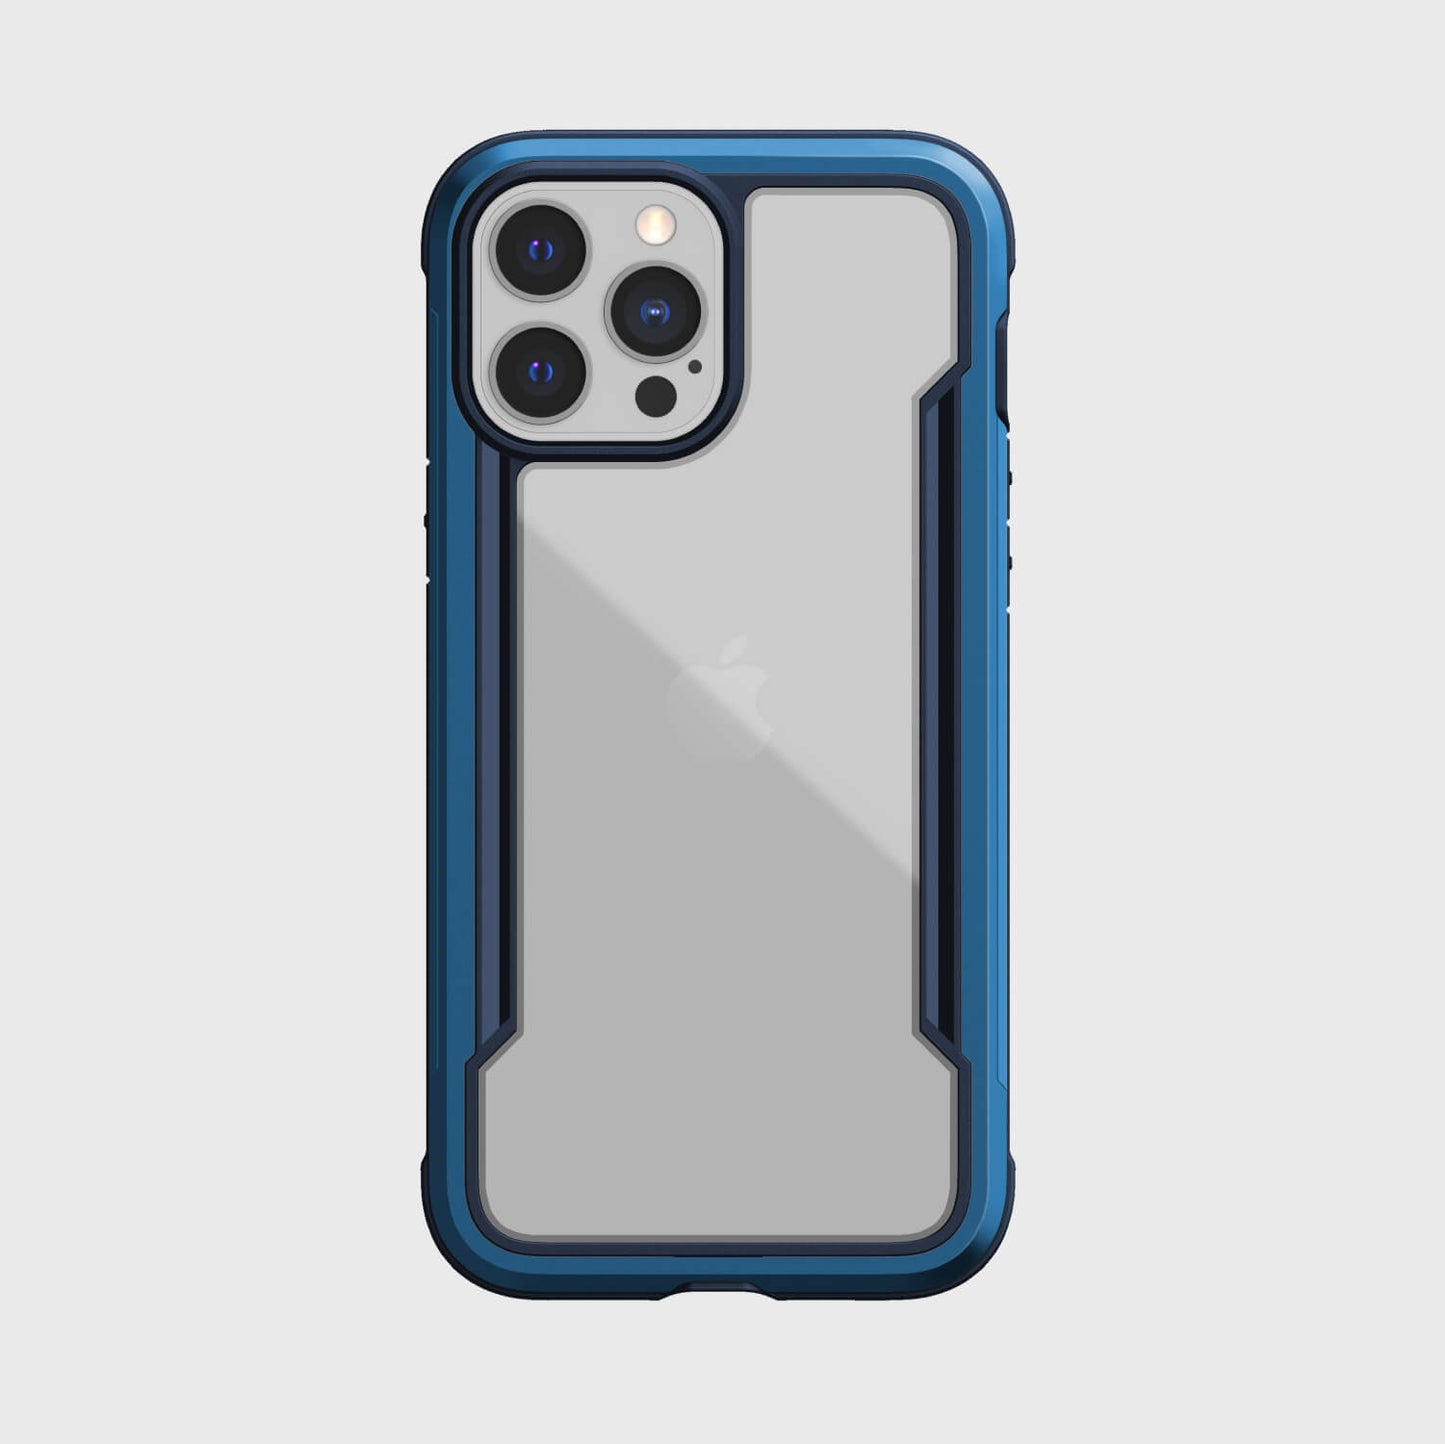 The iPhone 13 Pro Max Case - SHIELD PRO, by Raptic, is shown in blue.